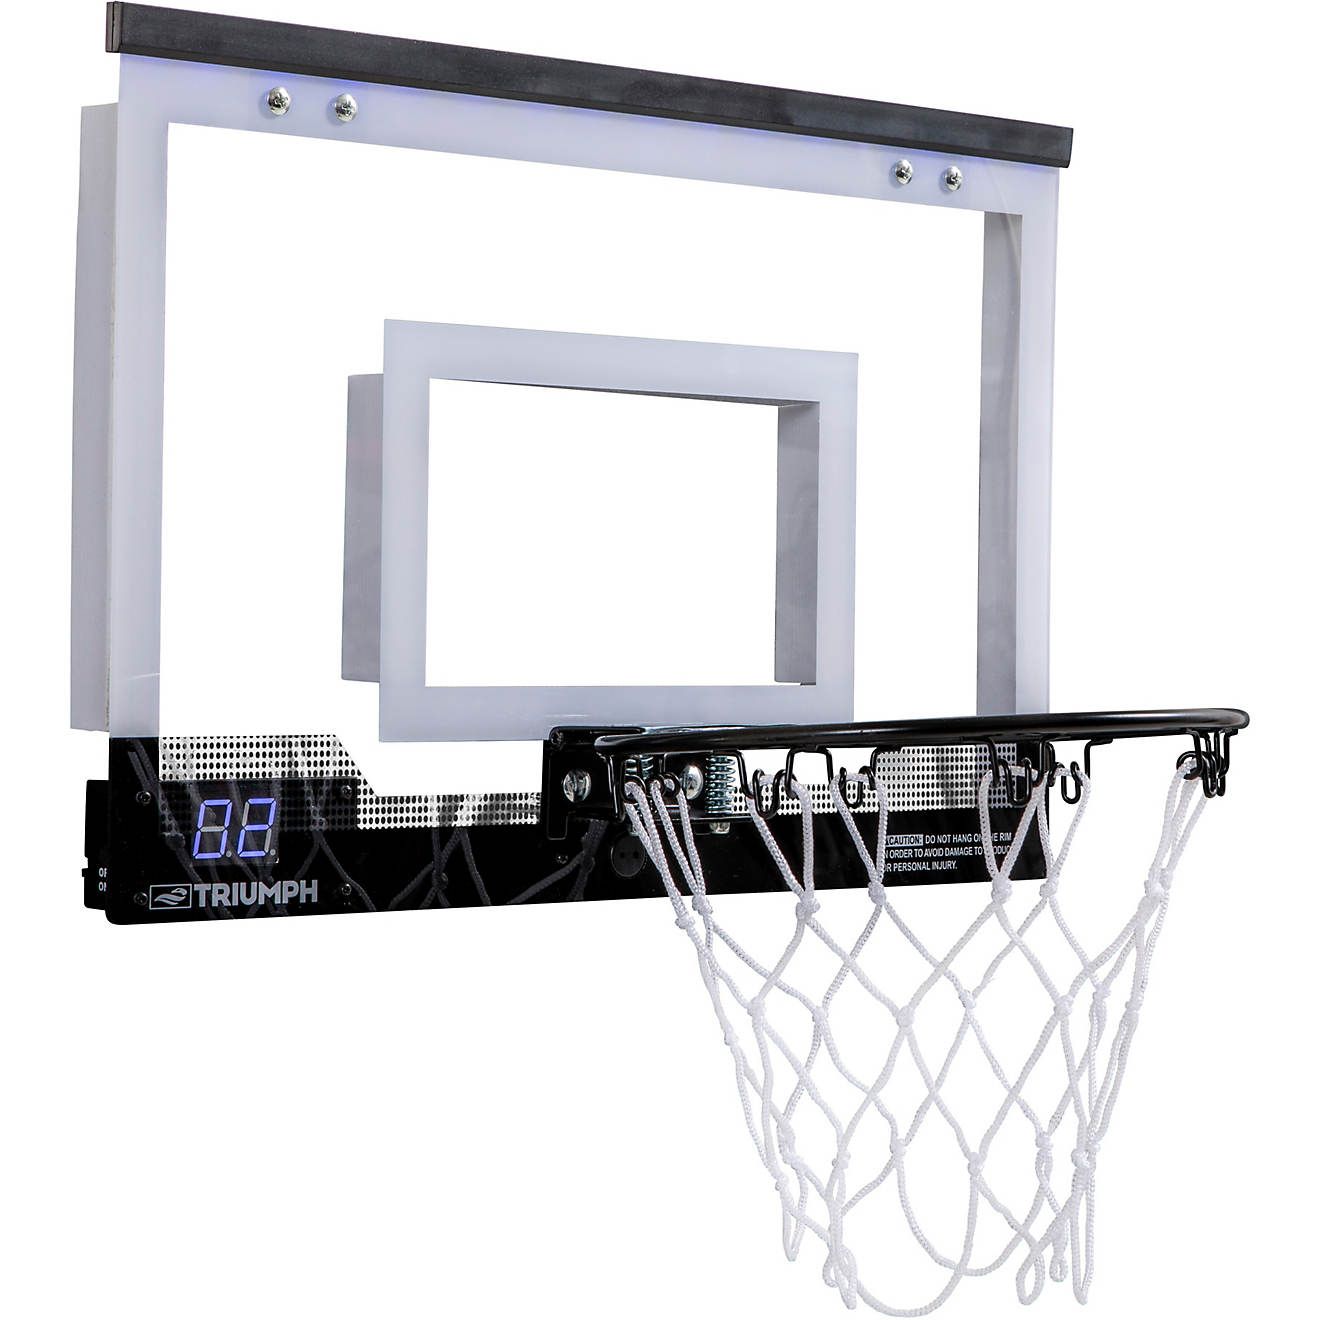 Triumph Over-the-Door 18 in LED Mini Basketball Hoop | Academy Sports + Outdoor Affiliate